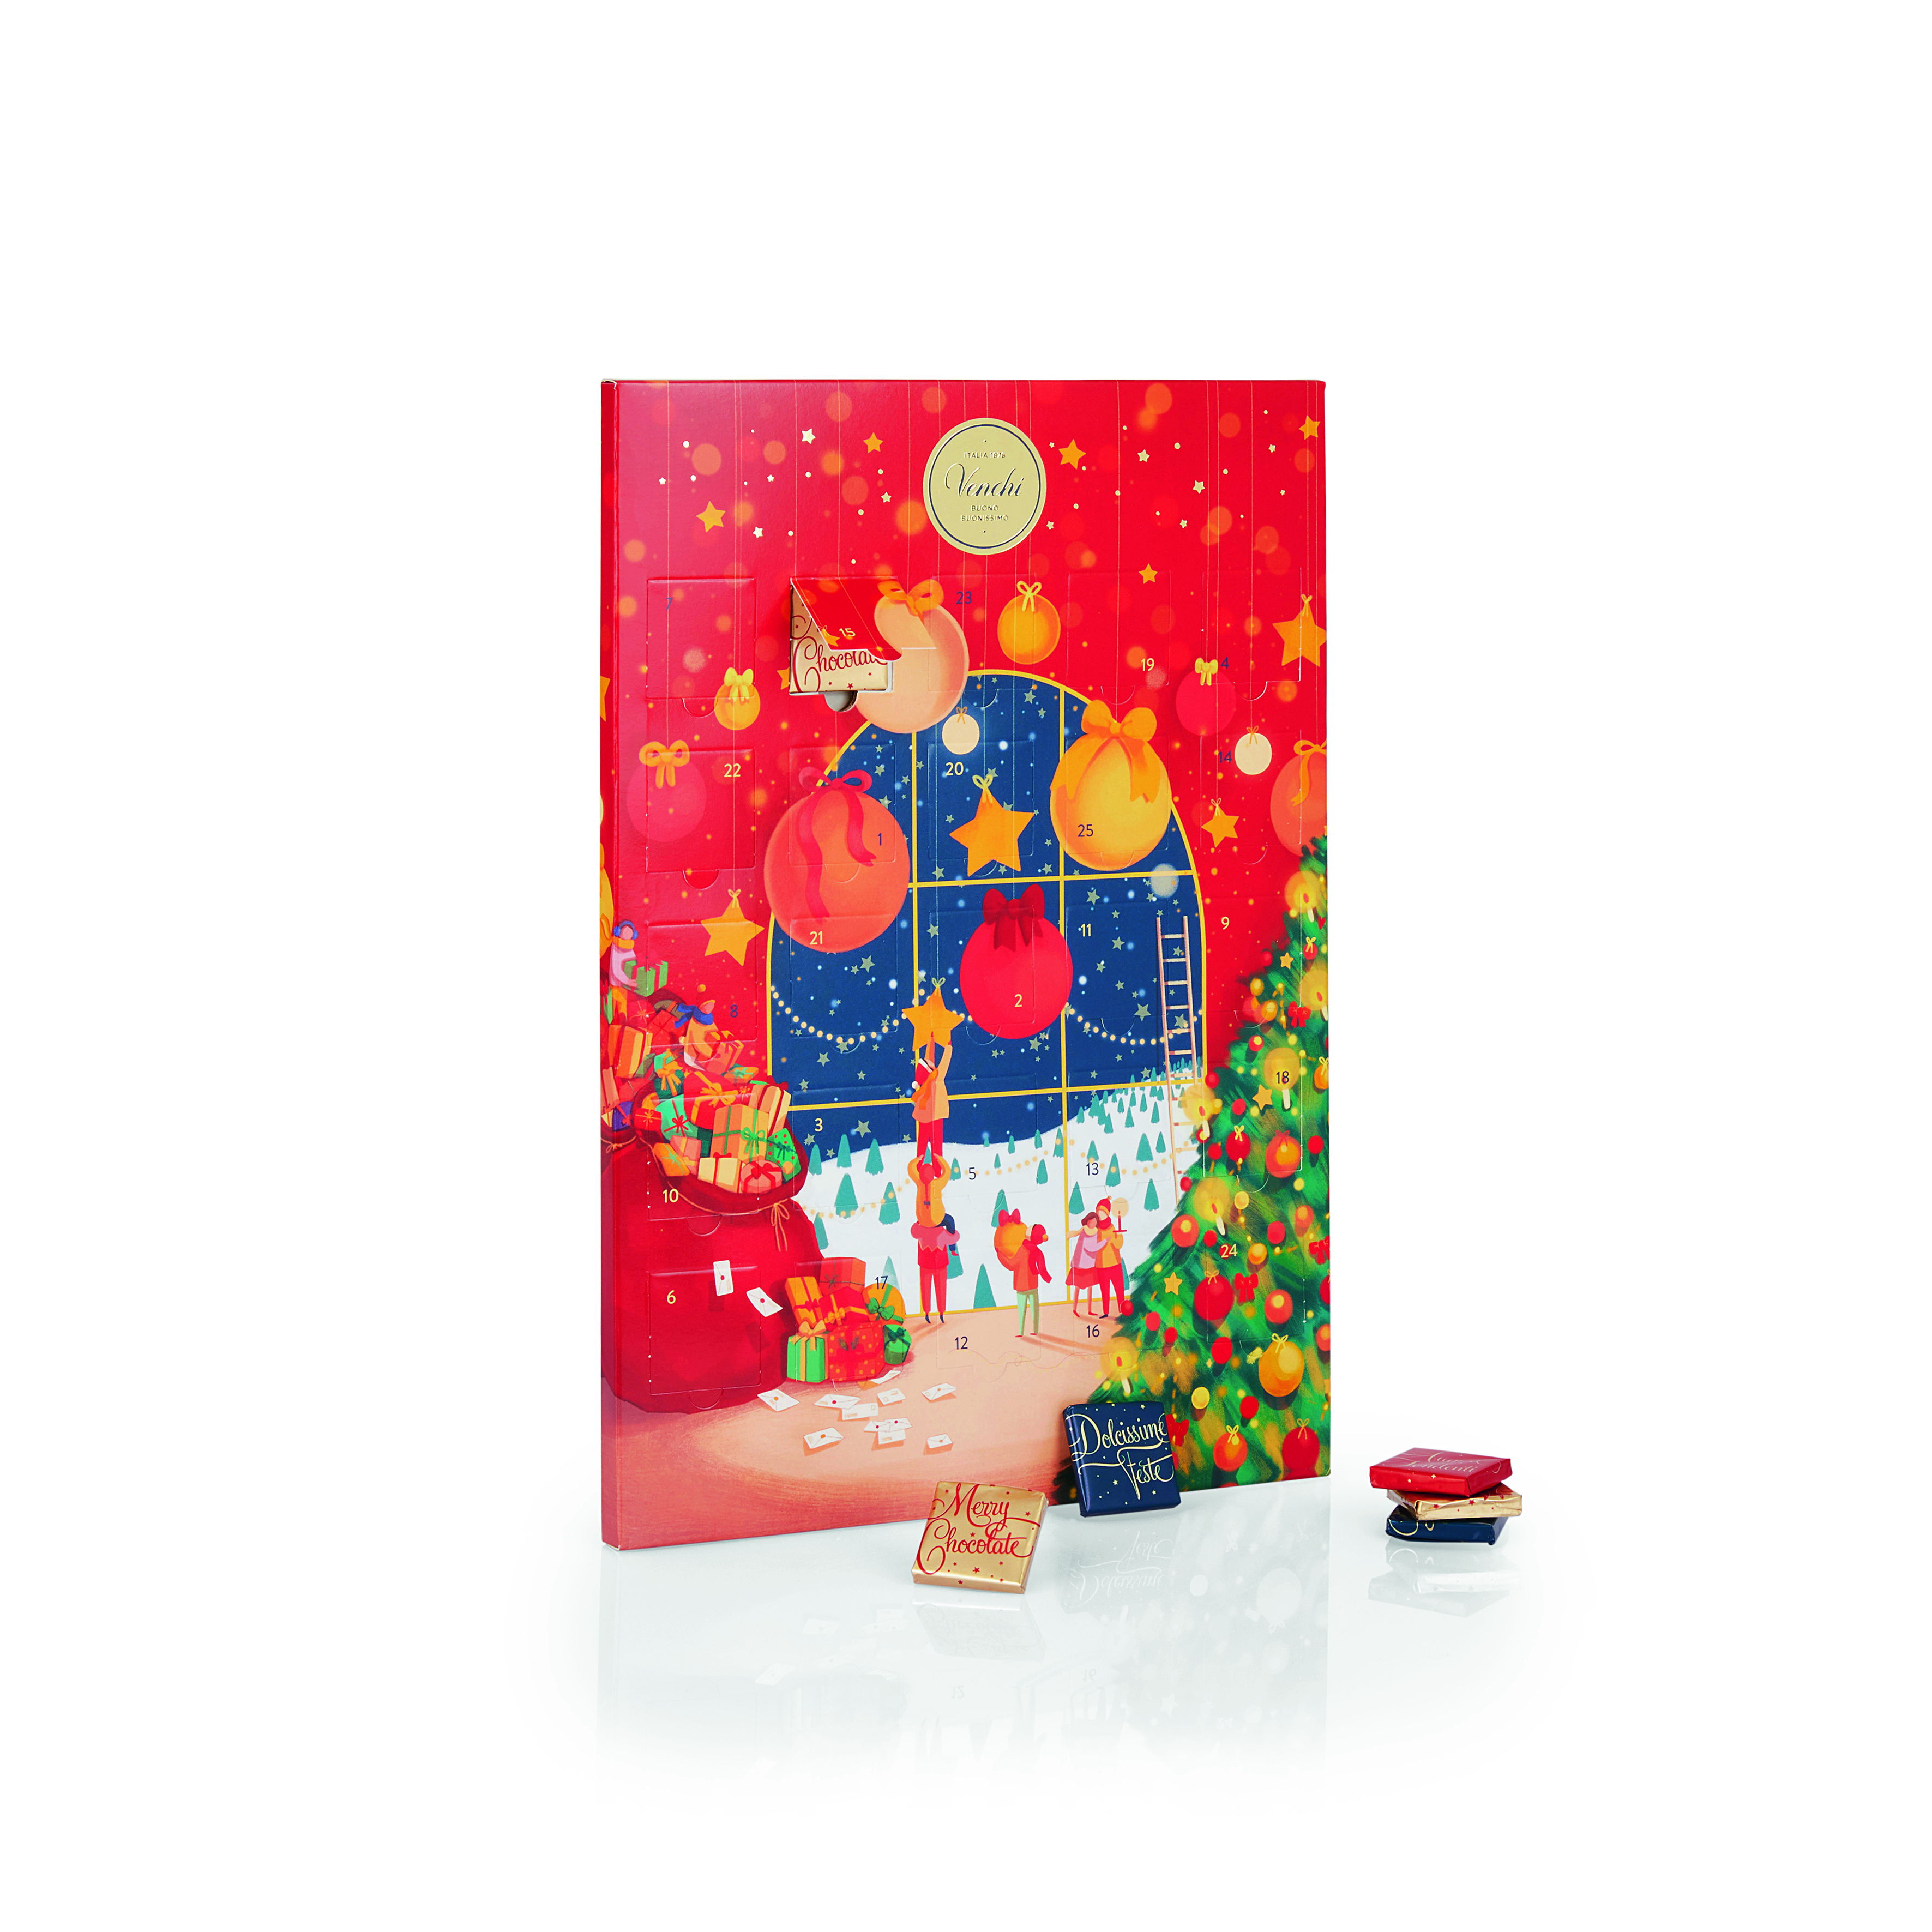 VENCHI LAUNCHES 2021 ADVENT CALENDARS FOR THE ULTIMATE CHOCOLATE LOVER